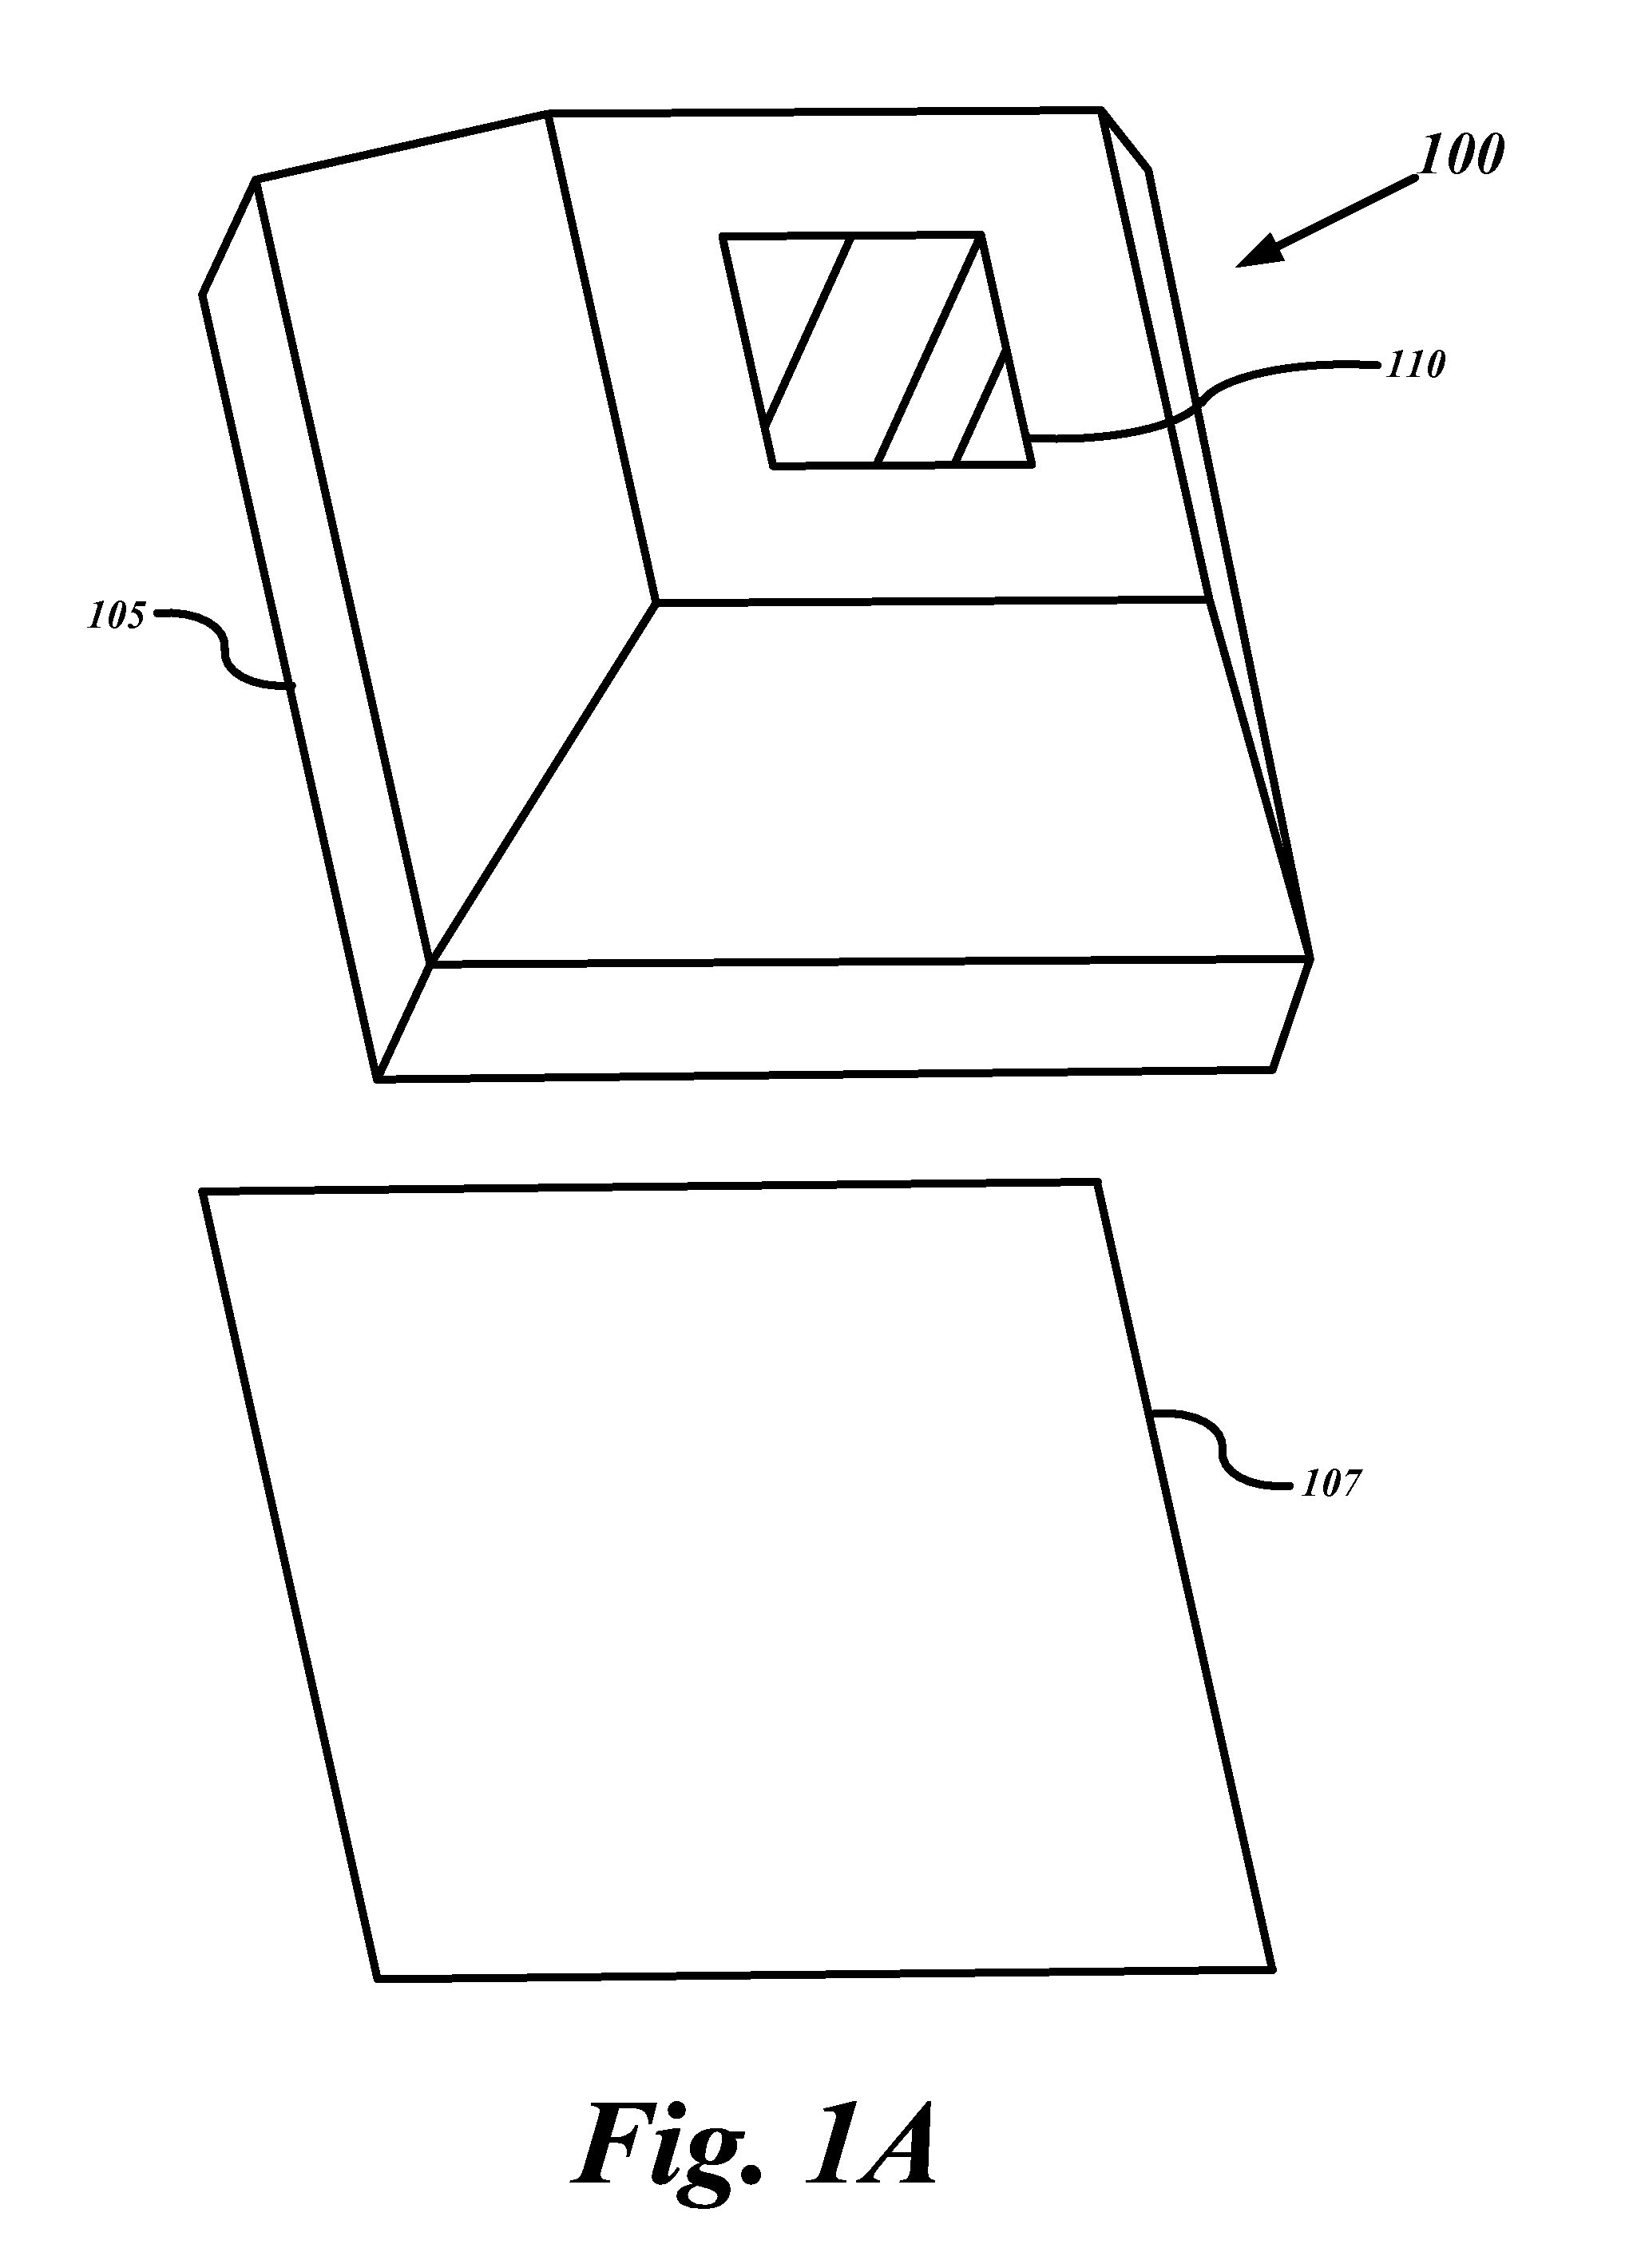 System and method of teaching and learning mathematics